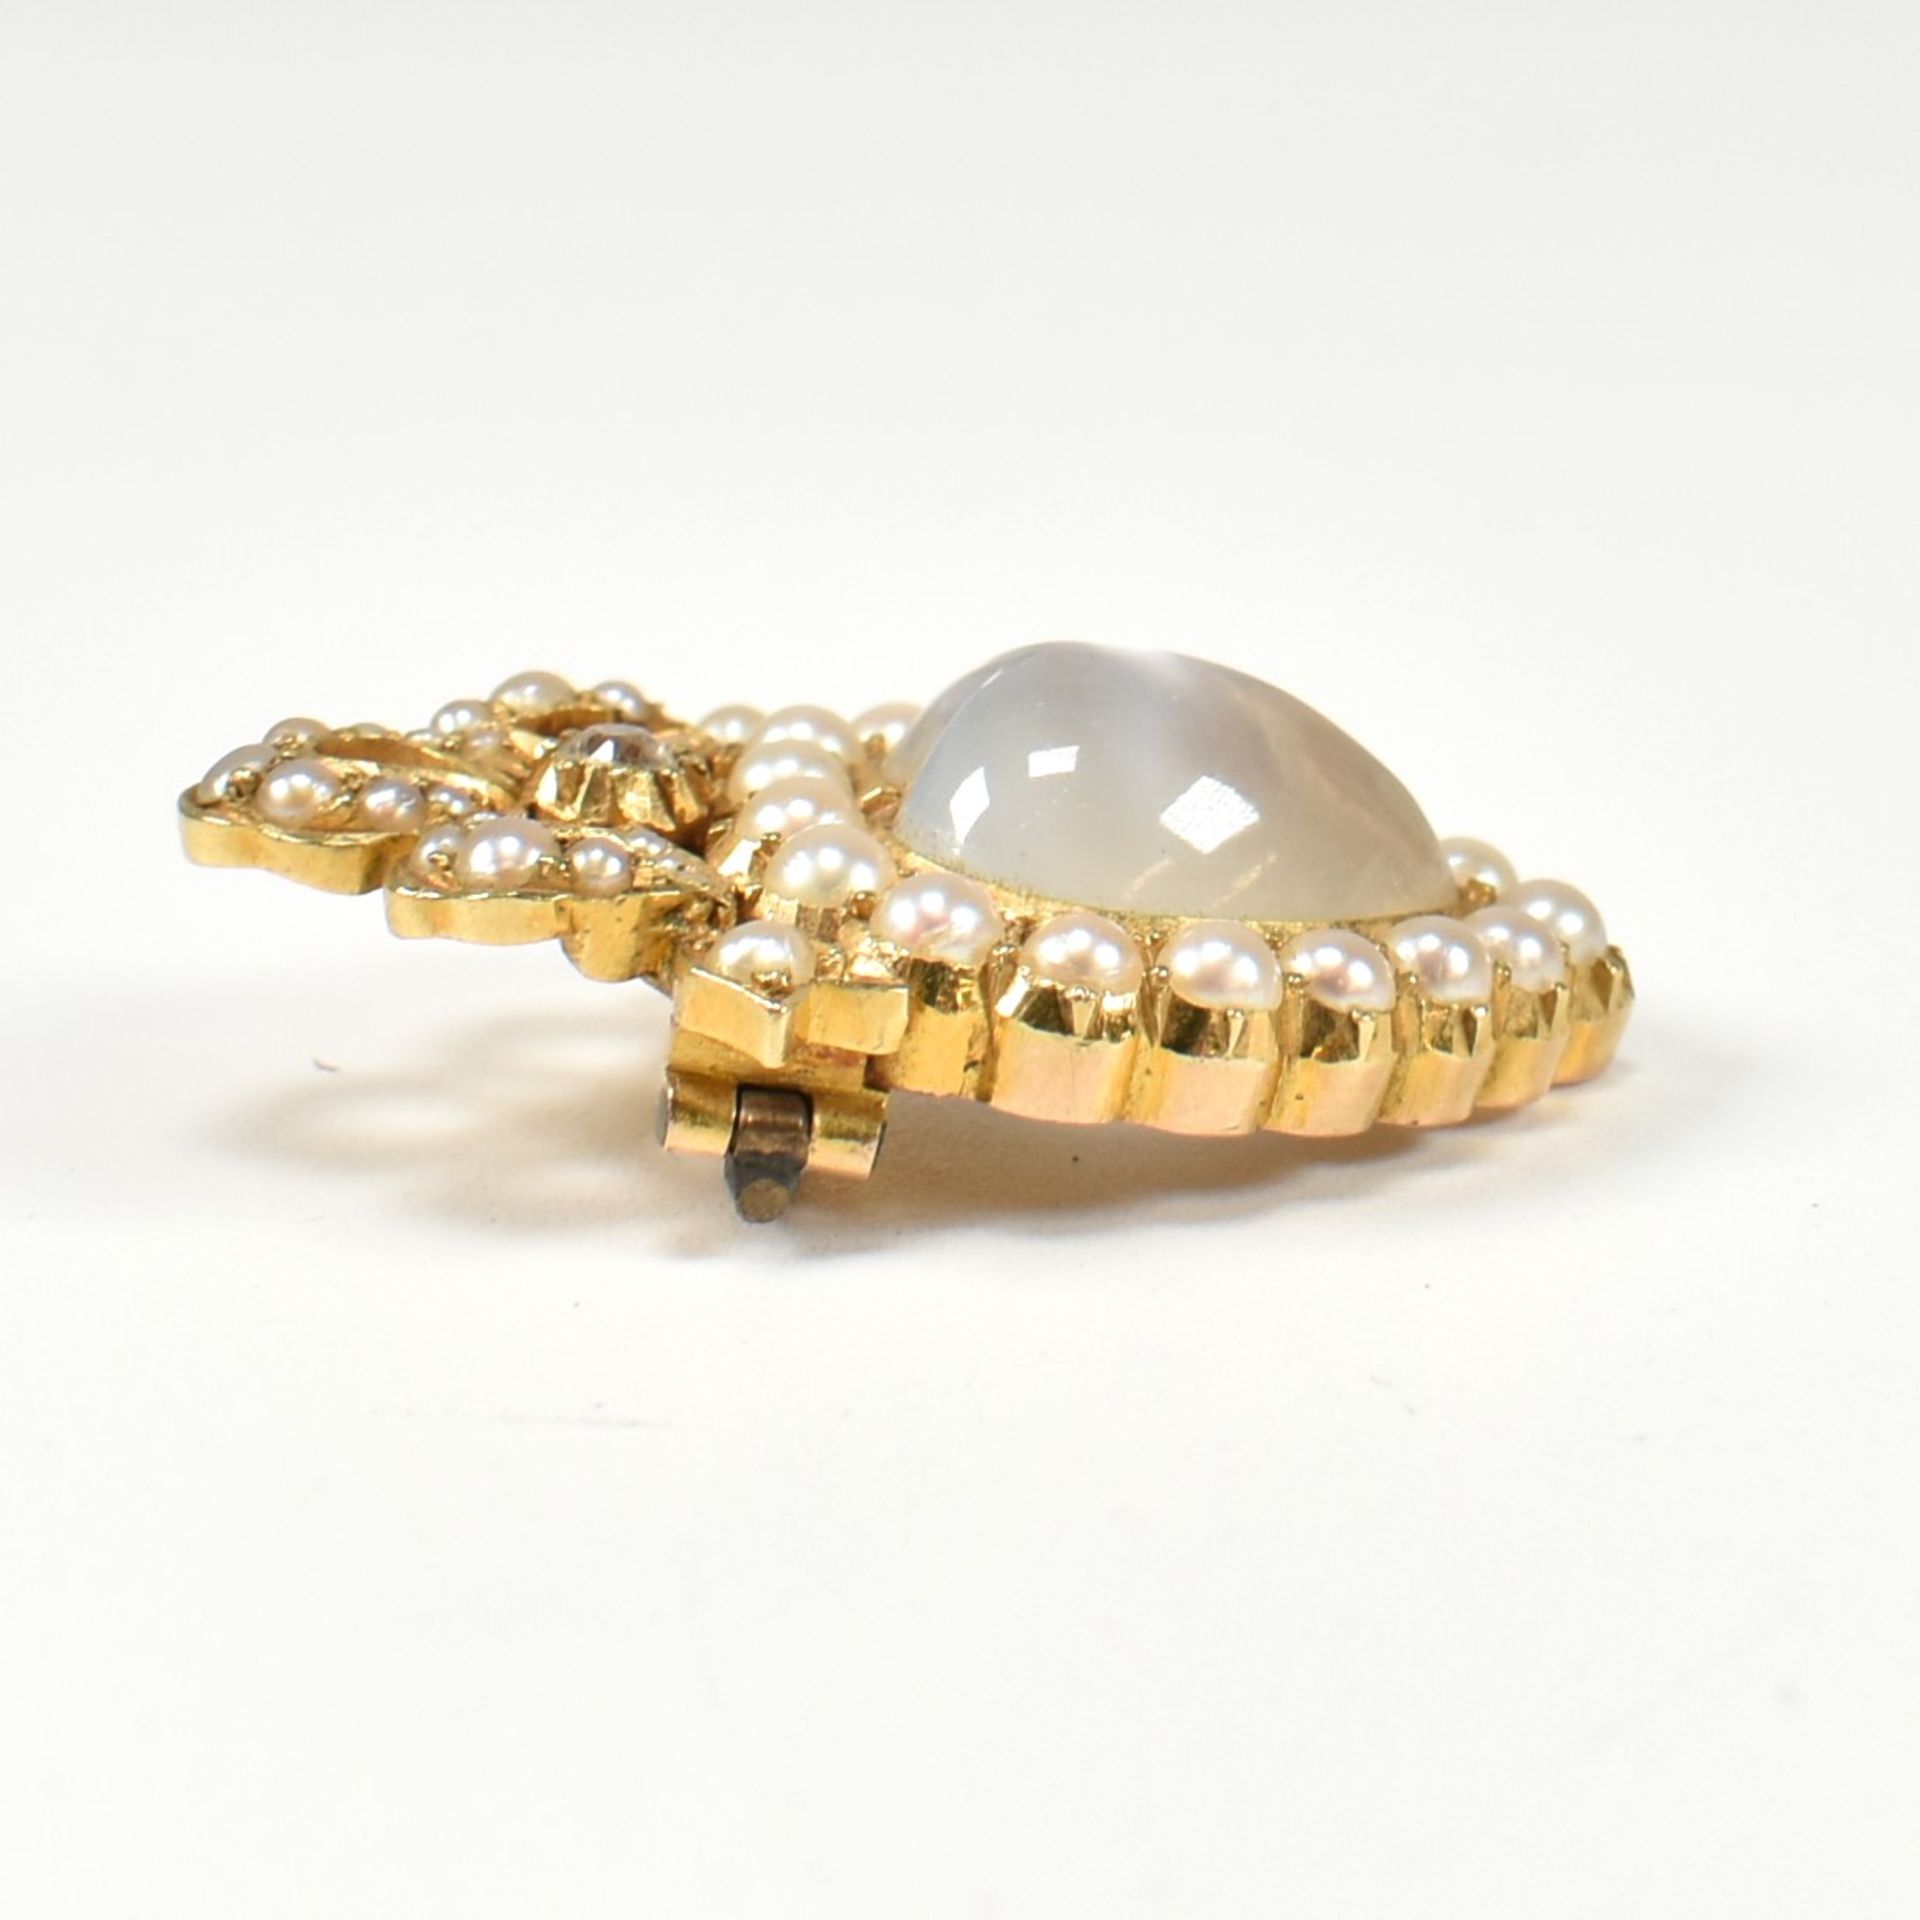 19TH CENTURY GOLD MOONSTONE & PEARL HEART BROOCH PIN - Image 6 of 7